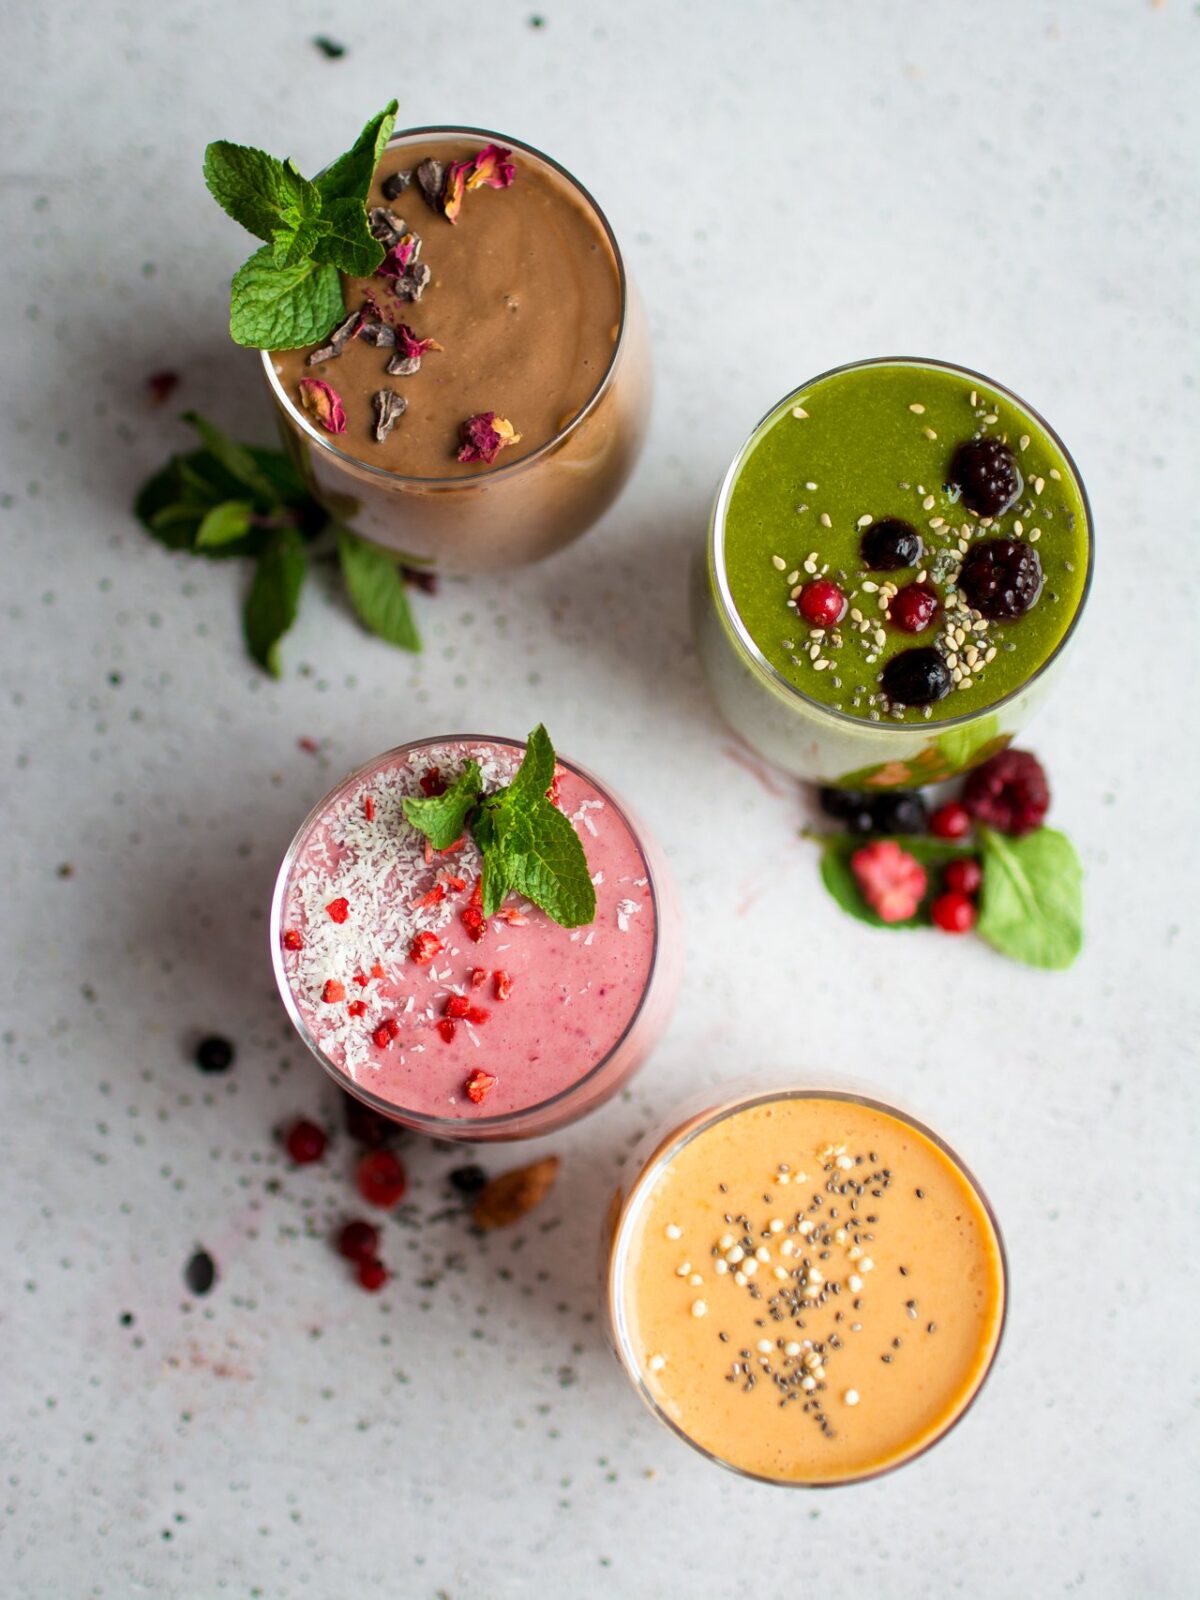 Learn how to make the perfect smoothie every time with these perfect ratios!